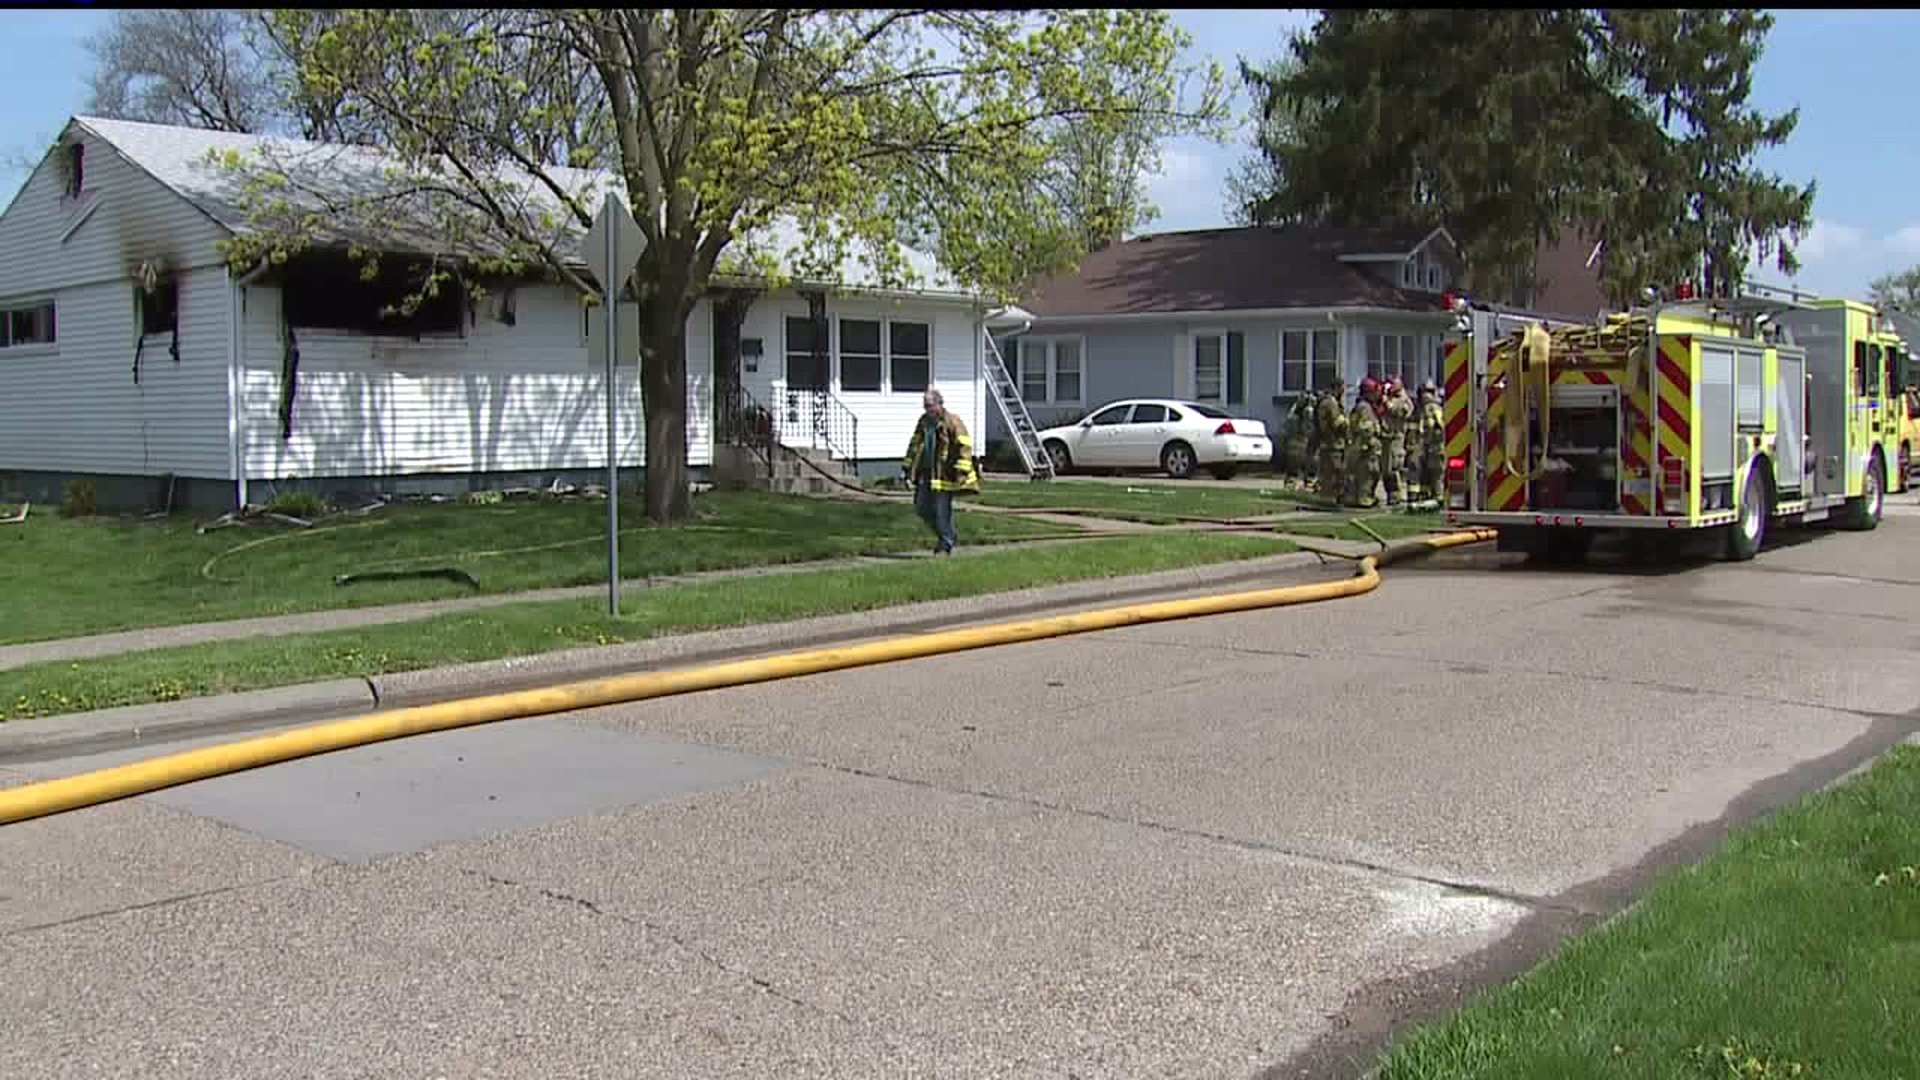 House fire in Bettendorf 4-25-19